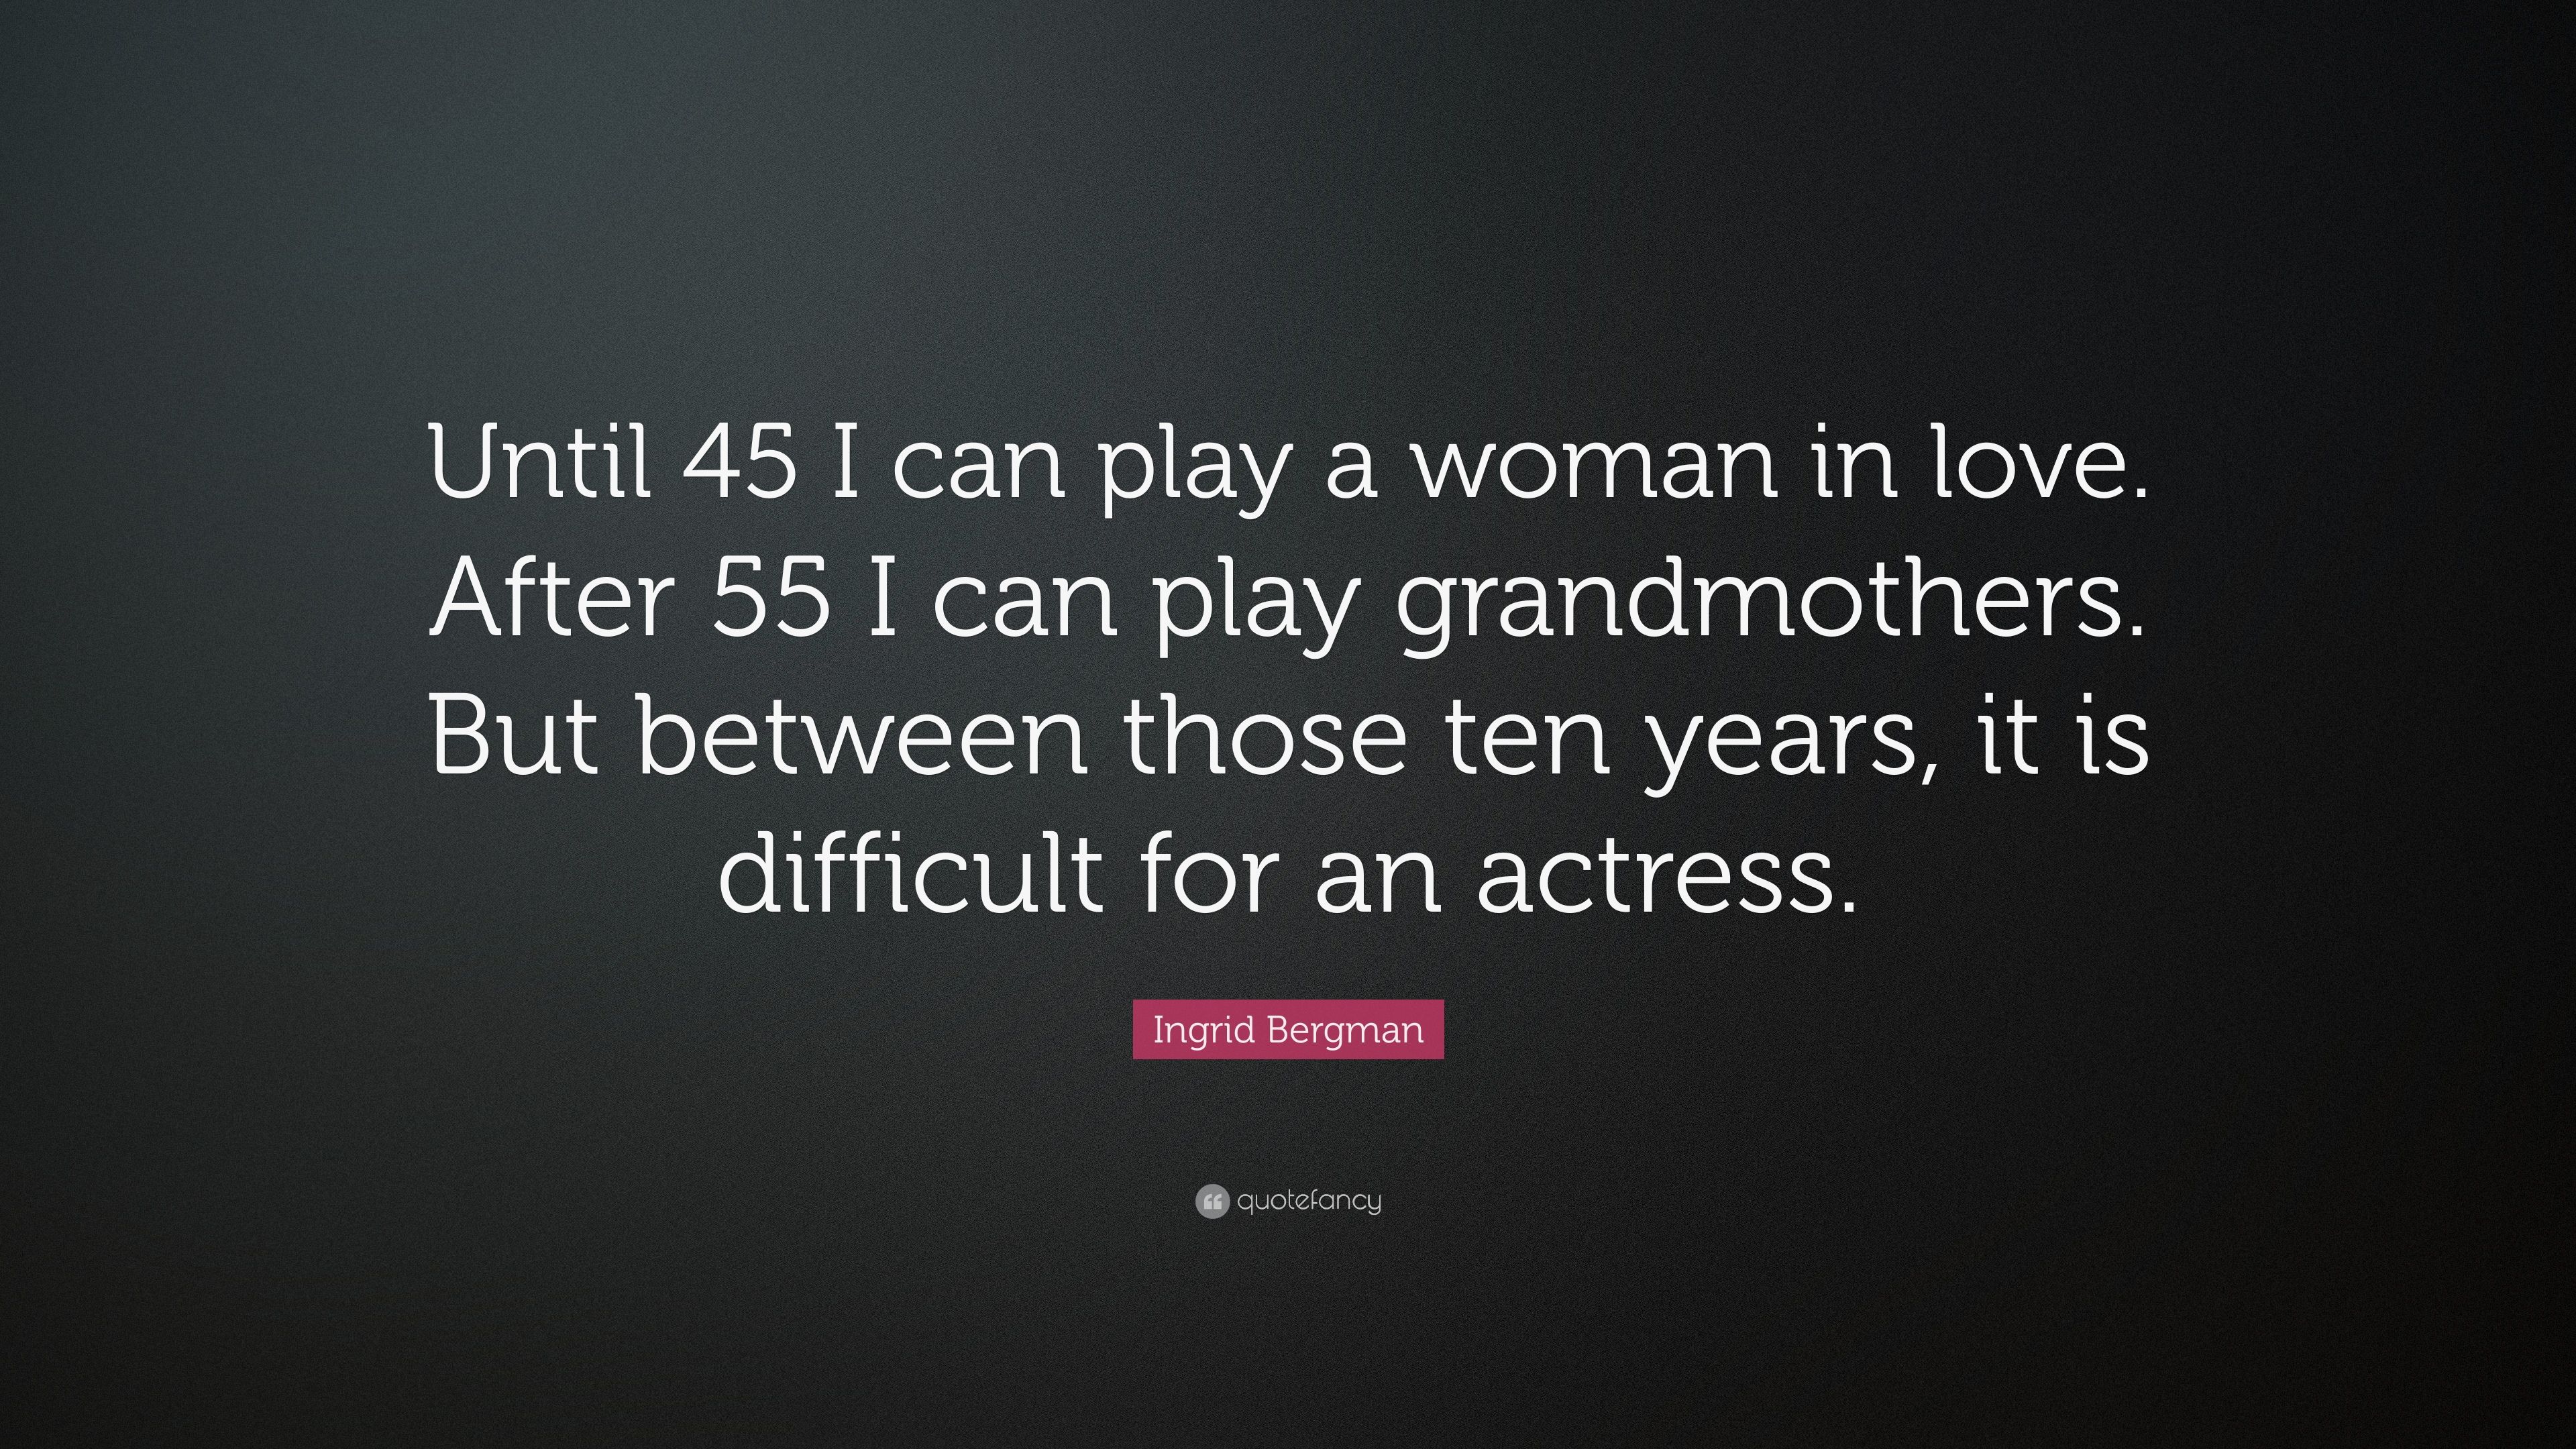 Ingrid Bergman Quote: “Until 45 I can play a woman in love. After